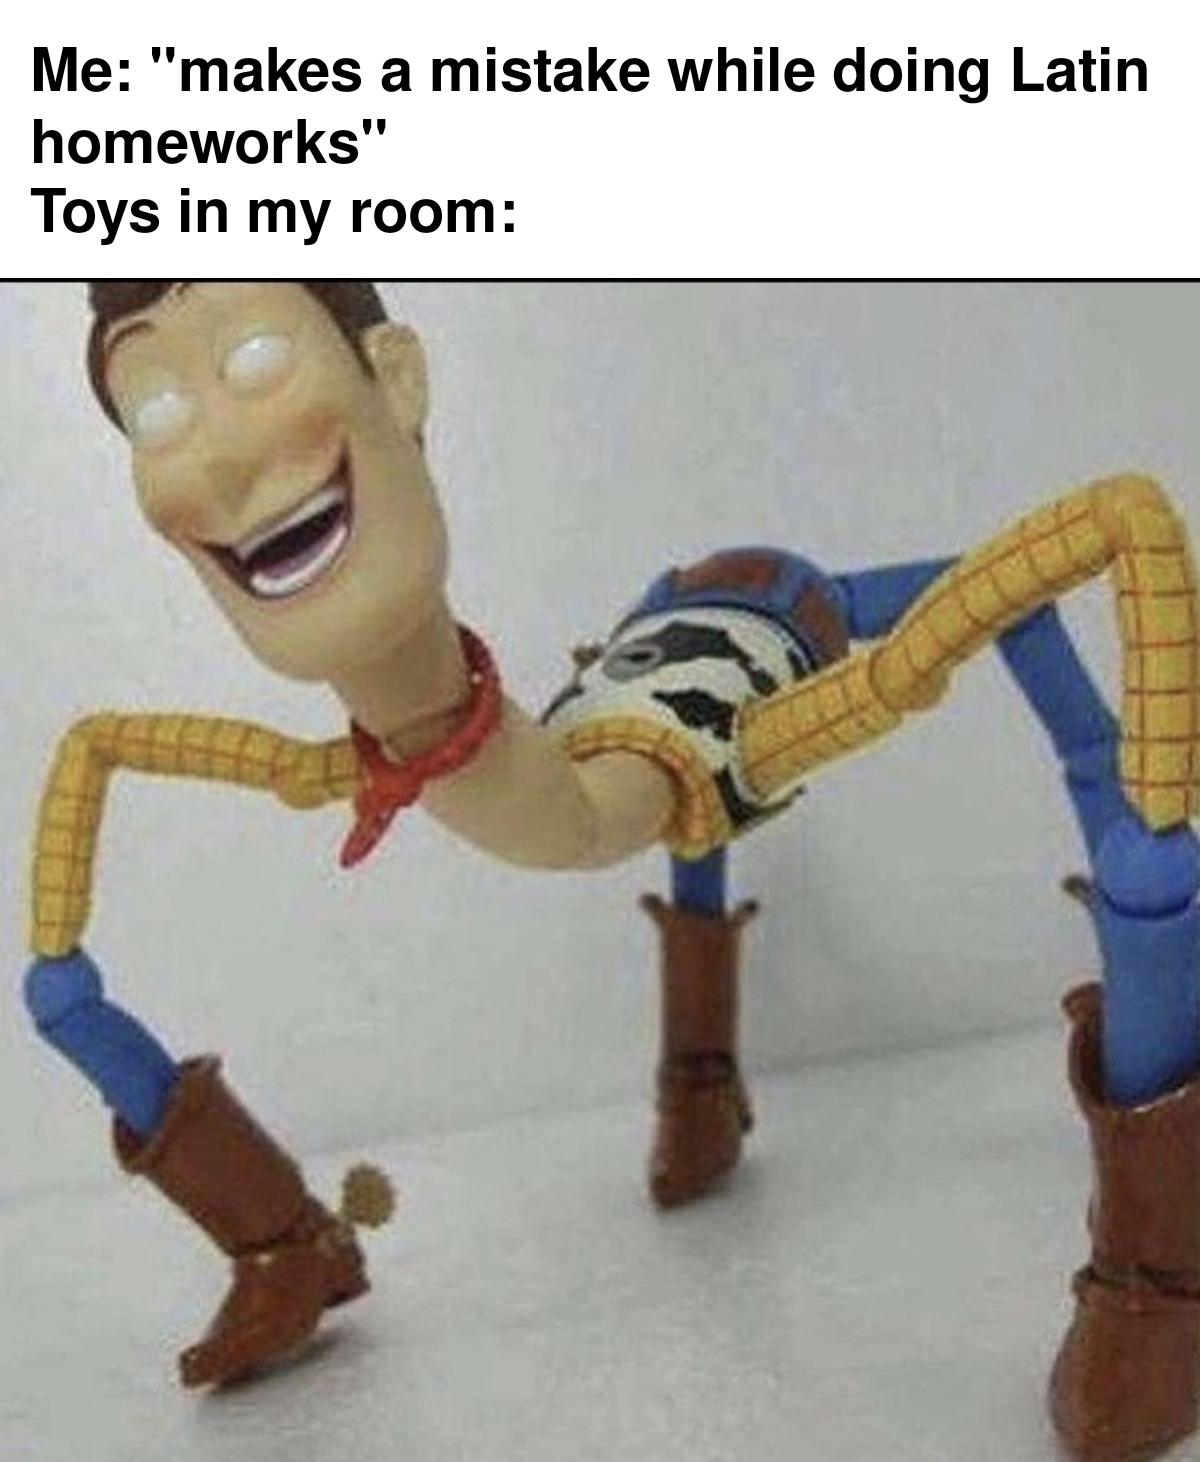 dank memes - spider woody - Me "makes a mistake while doing Latin homeworks" Toys in my room